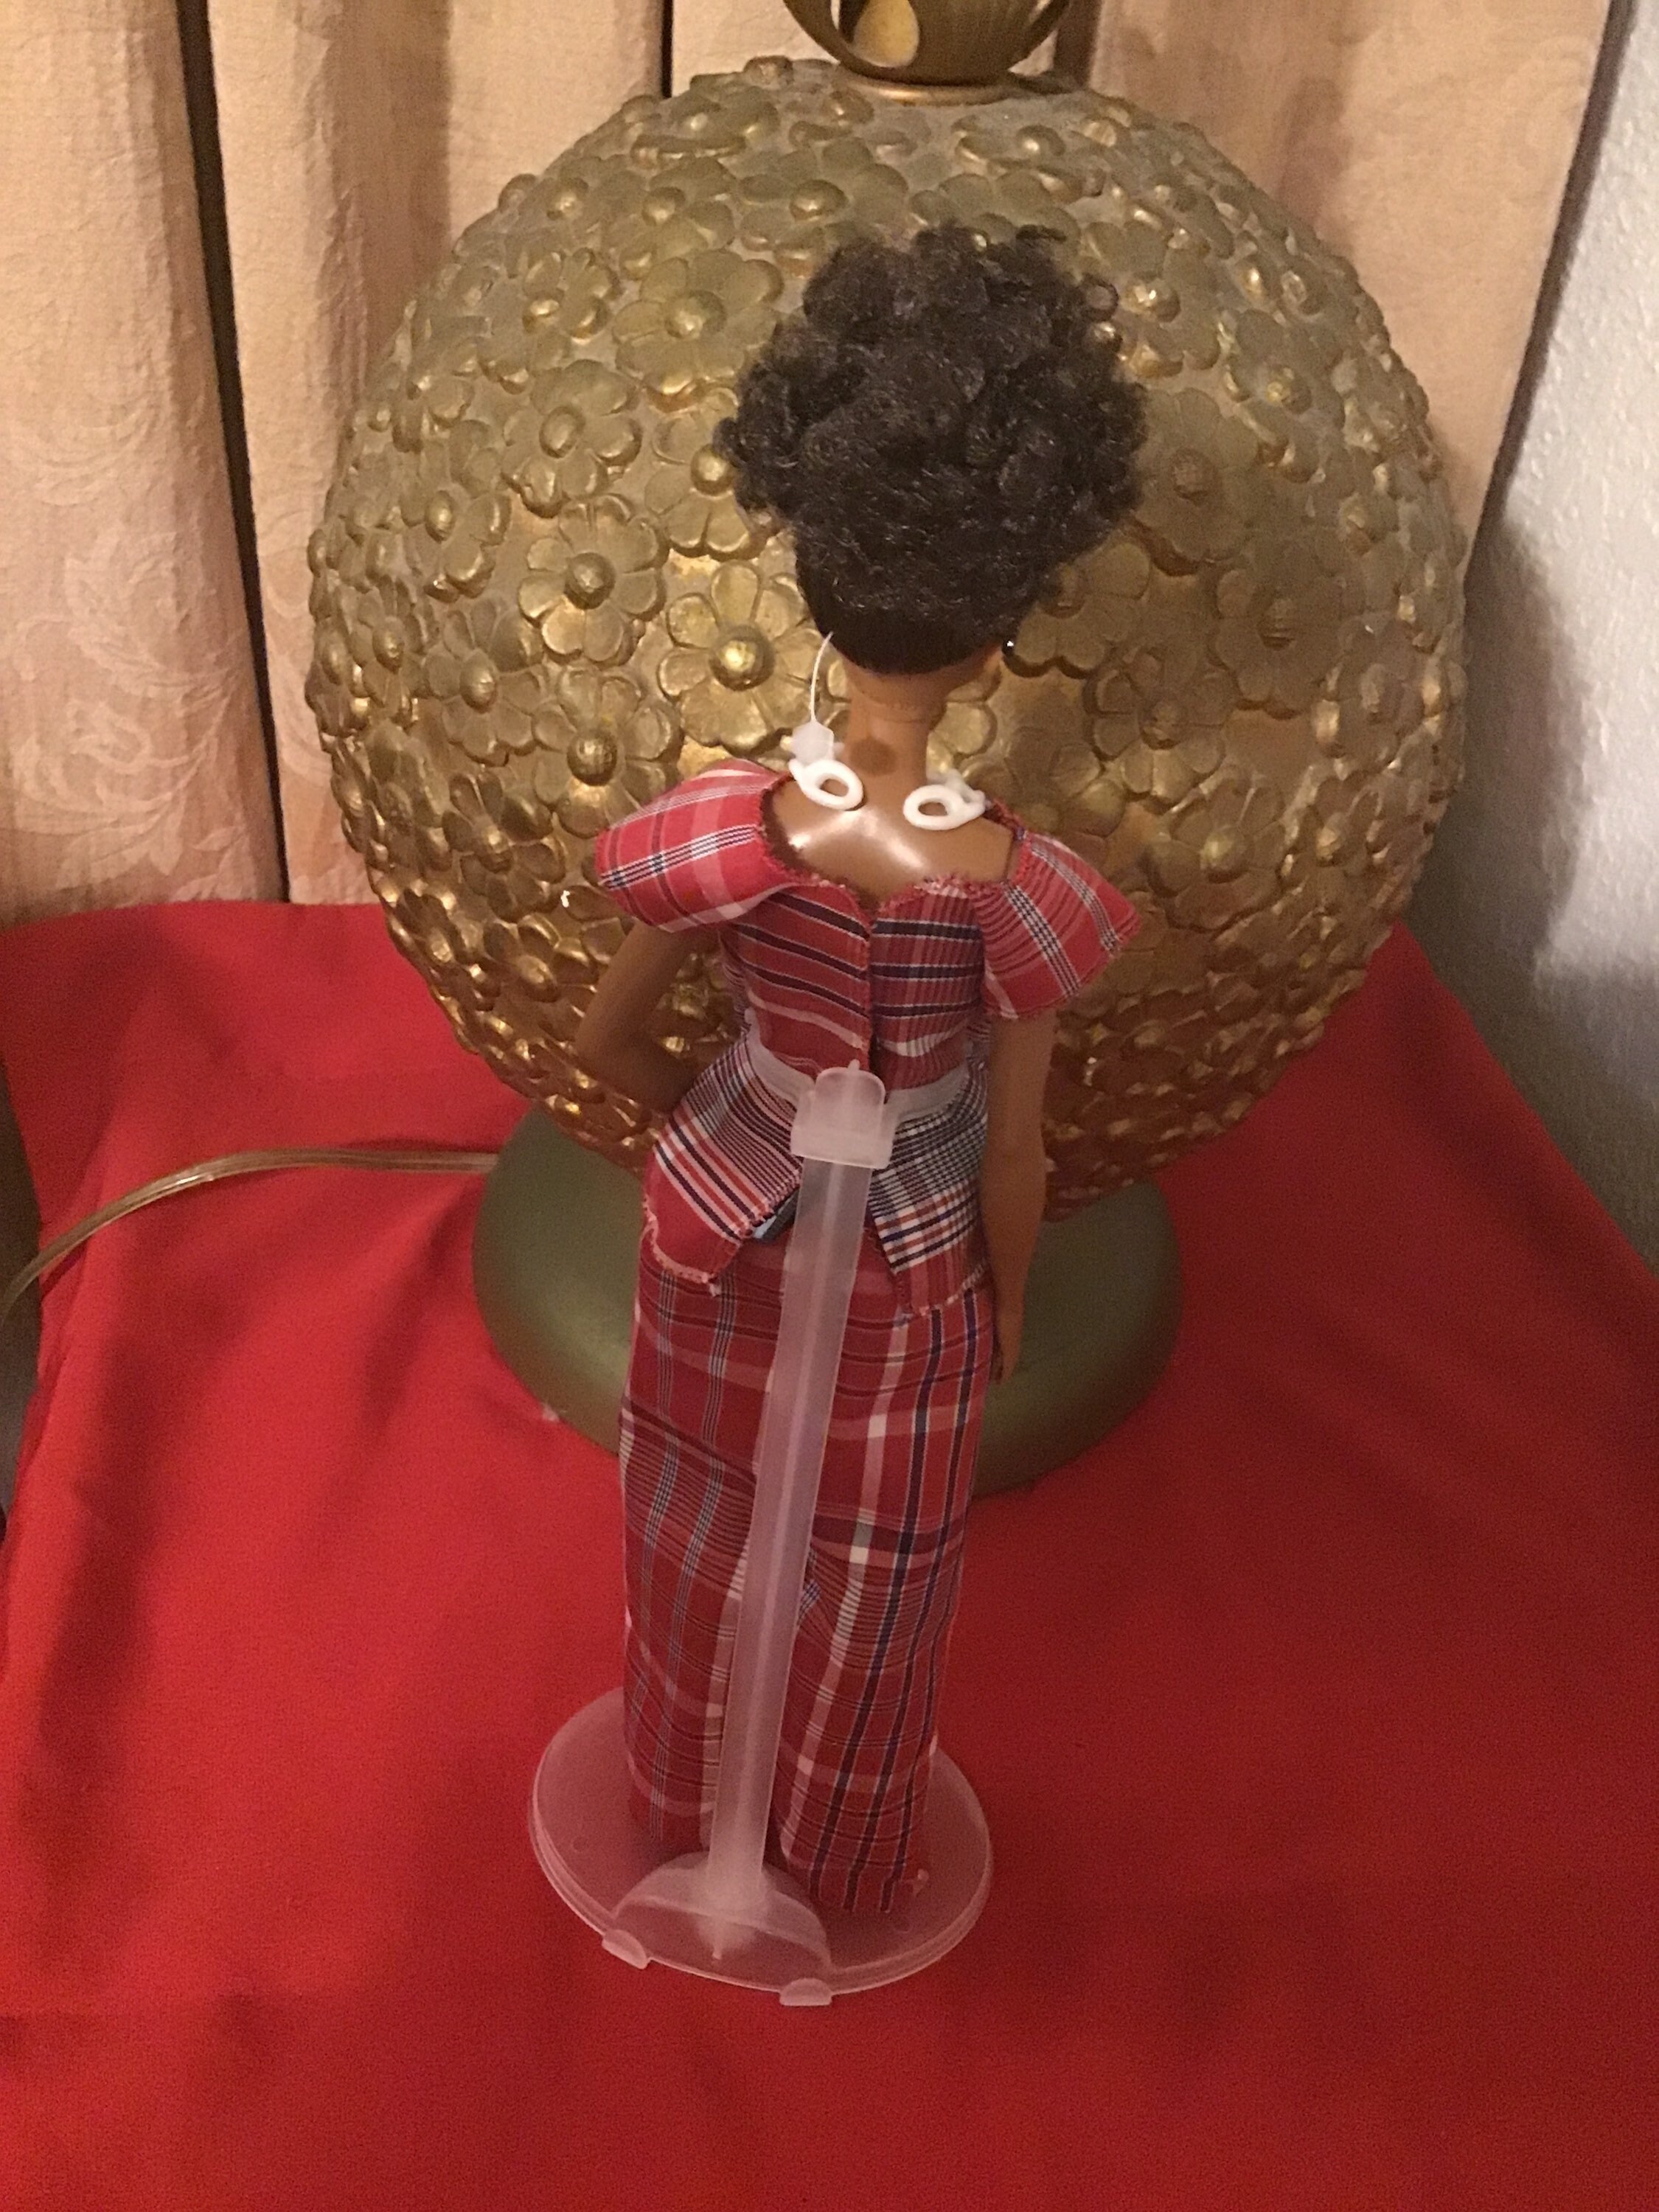 Jamaican Red Bandana Plaid 2 Piece Outfit on Black Barbie -  Sweden